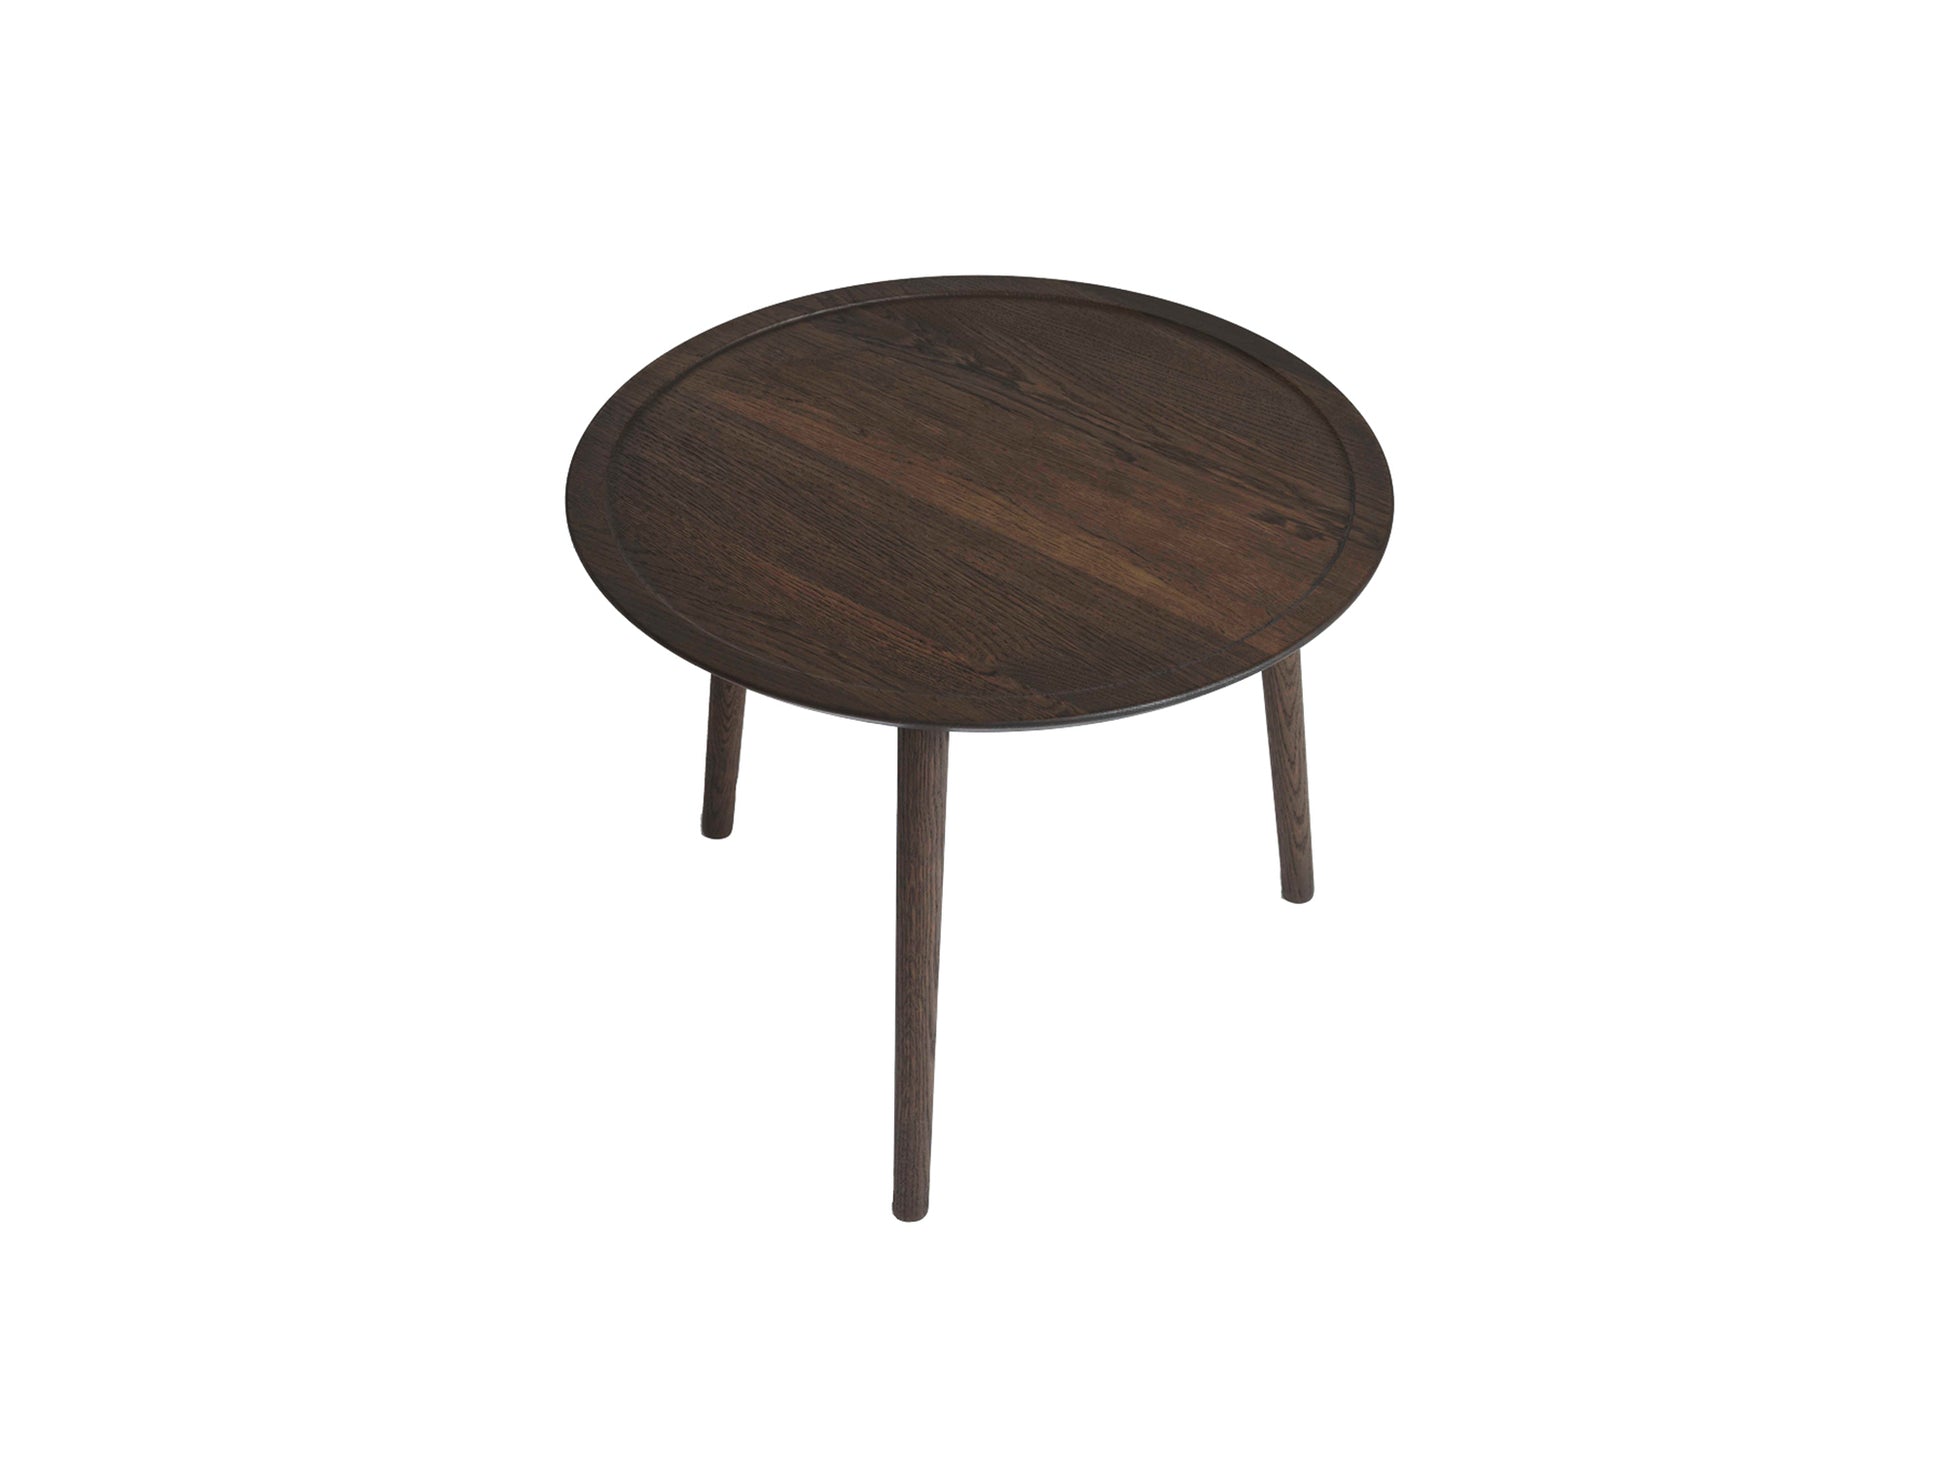 Dodona Coffee Table by Ro Collection - Diameter: 60 cm / Height: 46 cm / Smoked Oak